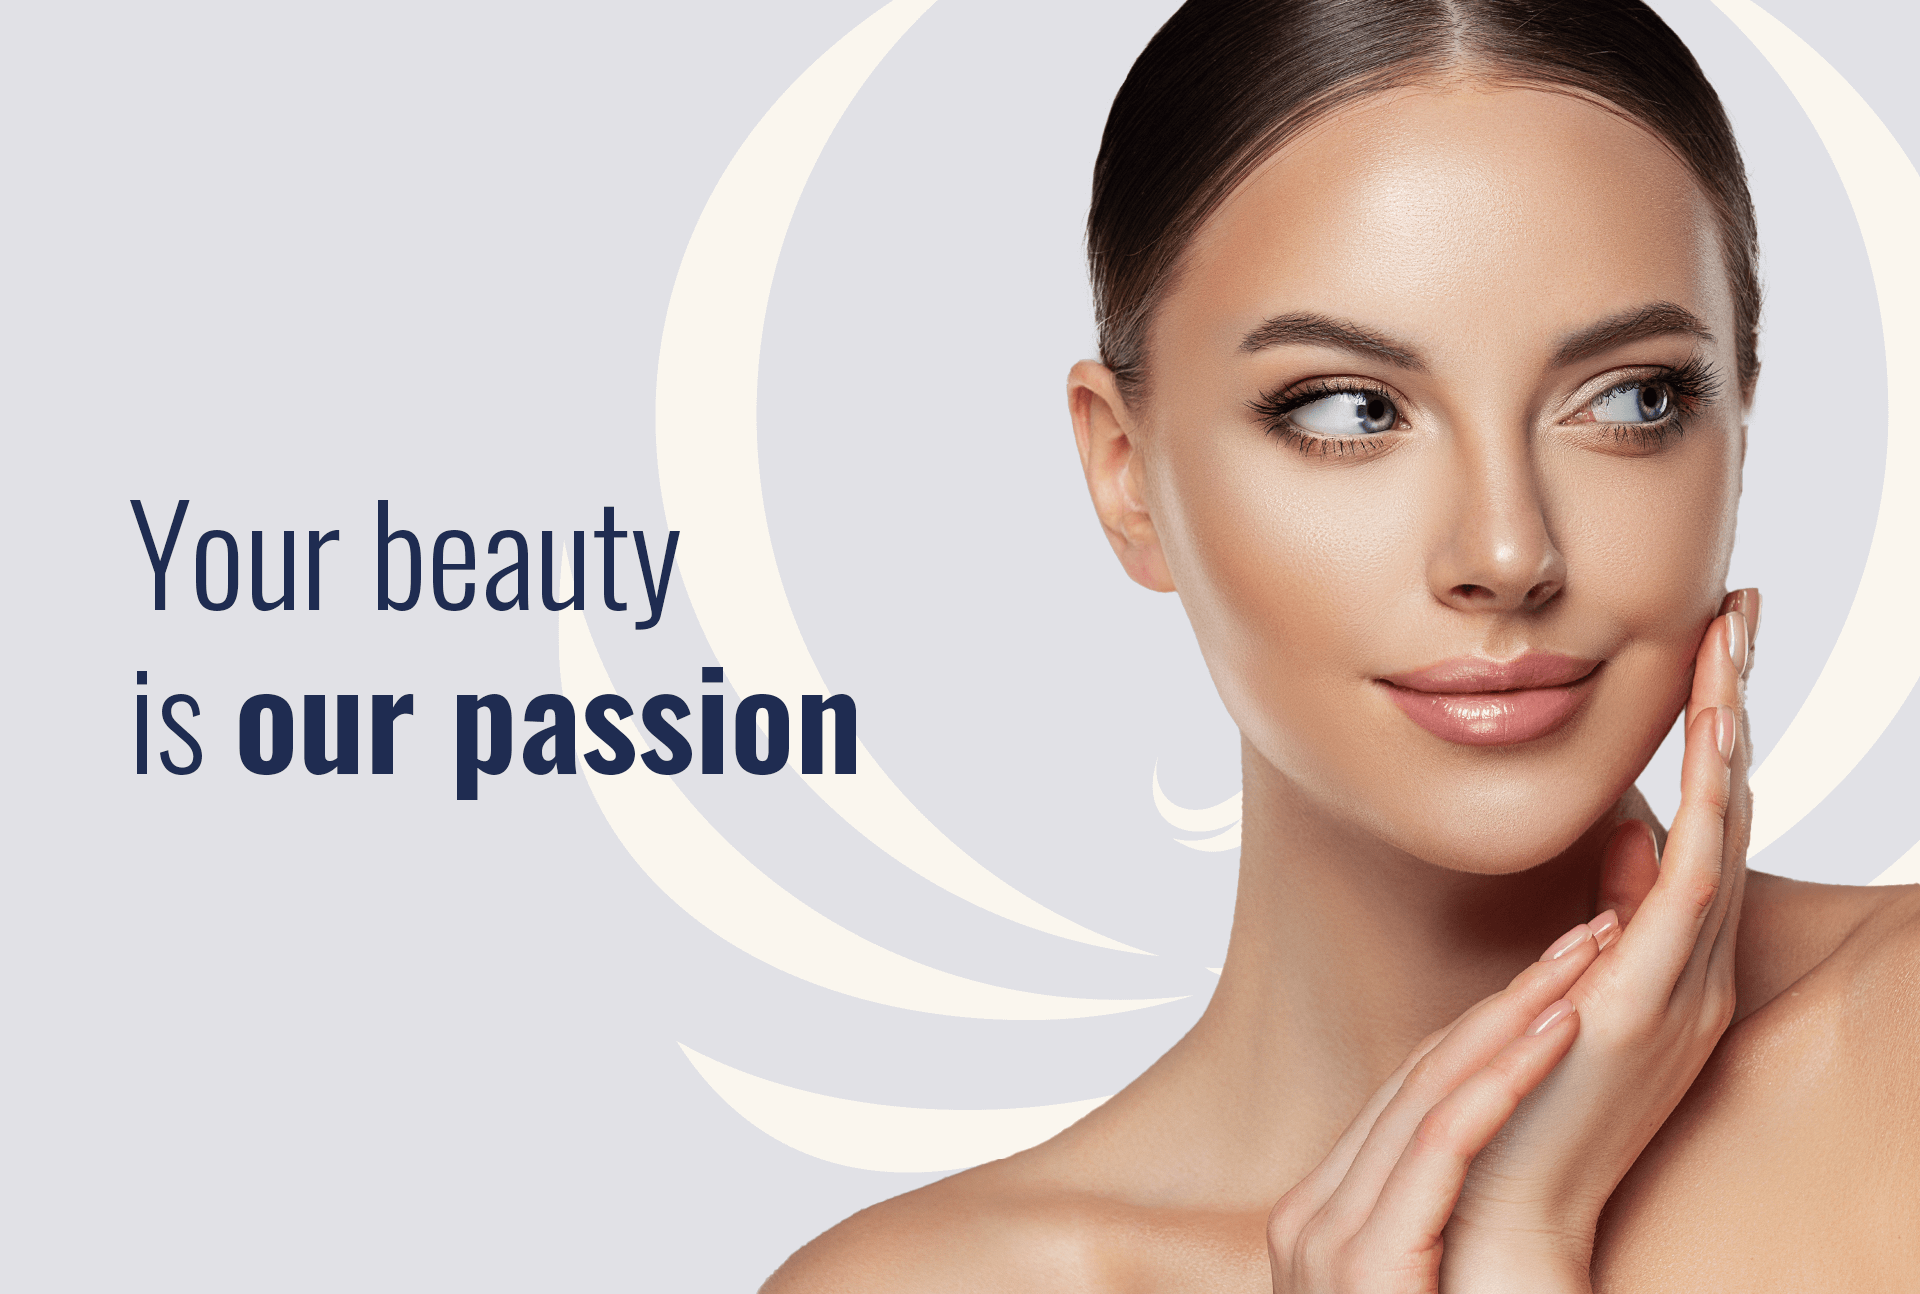 Your beauty is our passion